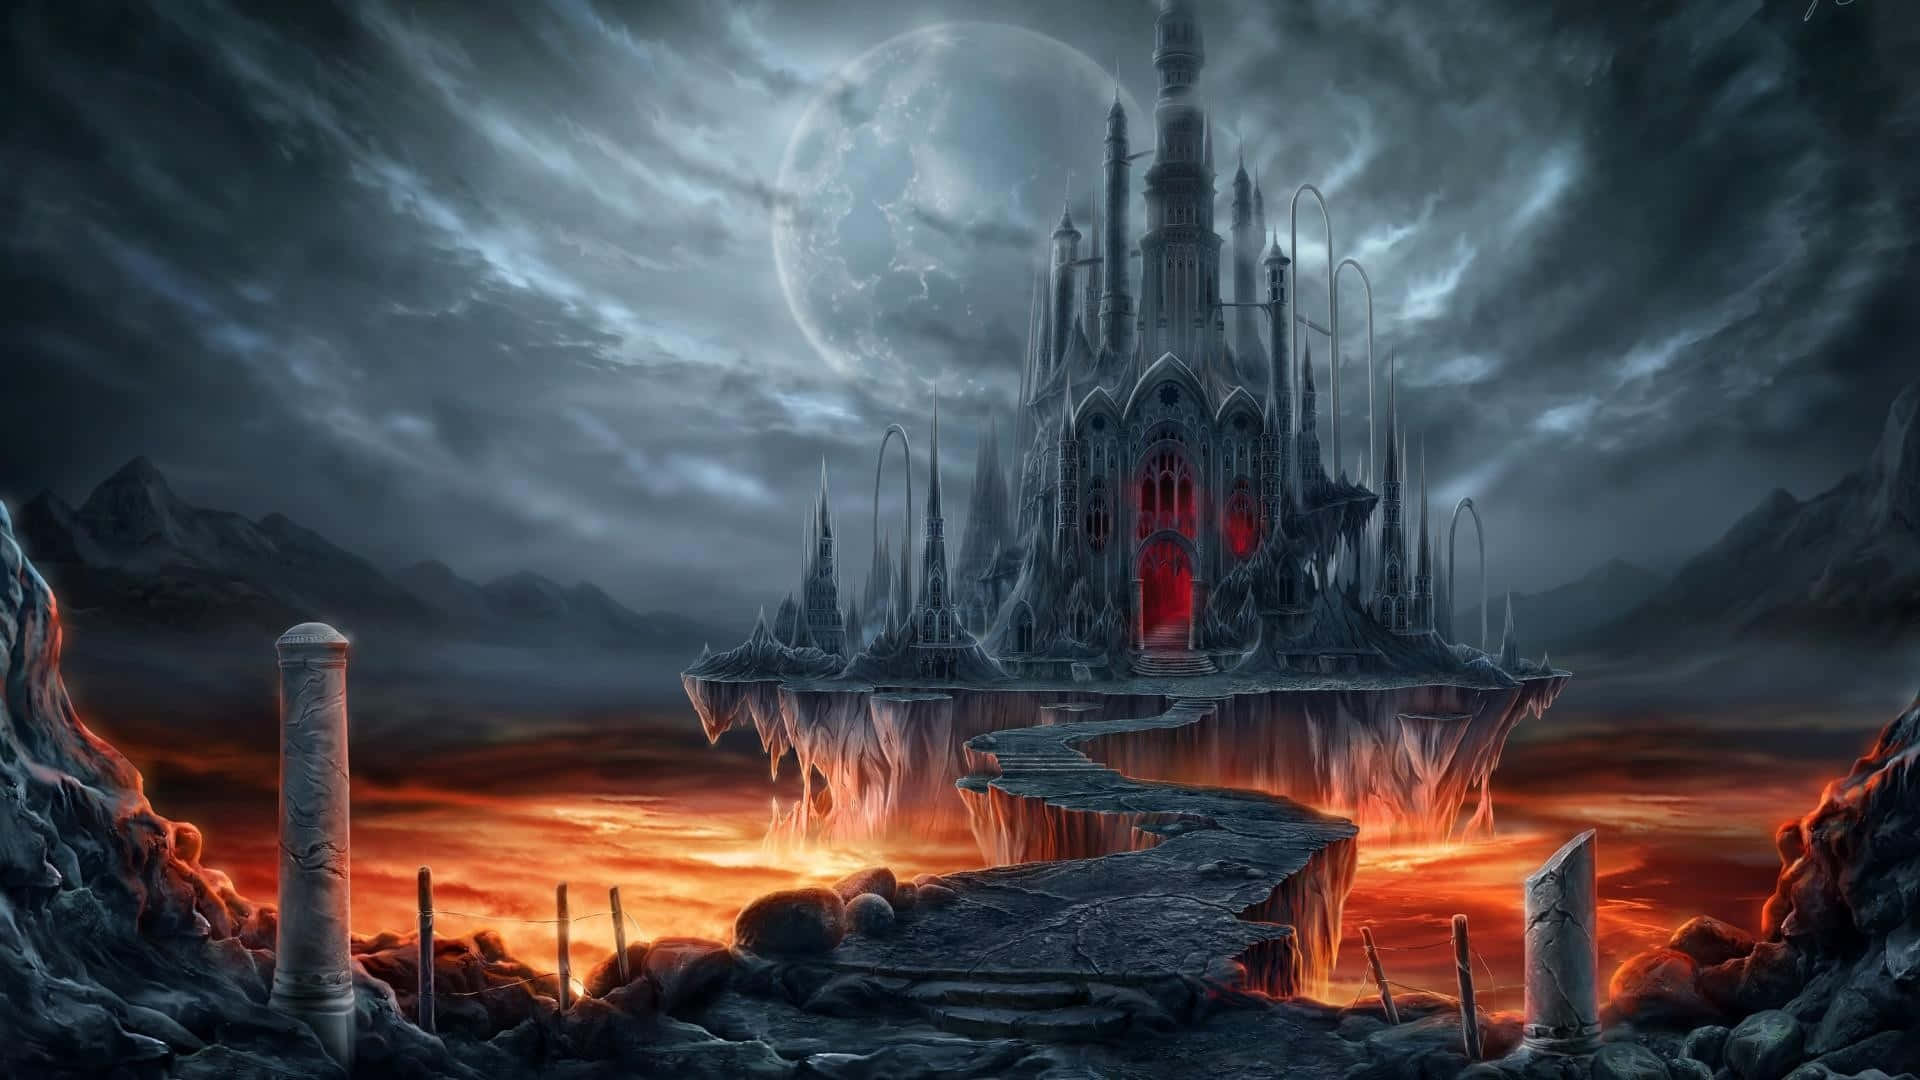 A Dark Castle With A Flaming Tower In The Background